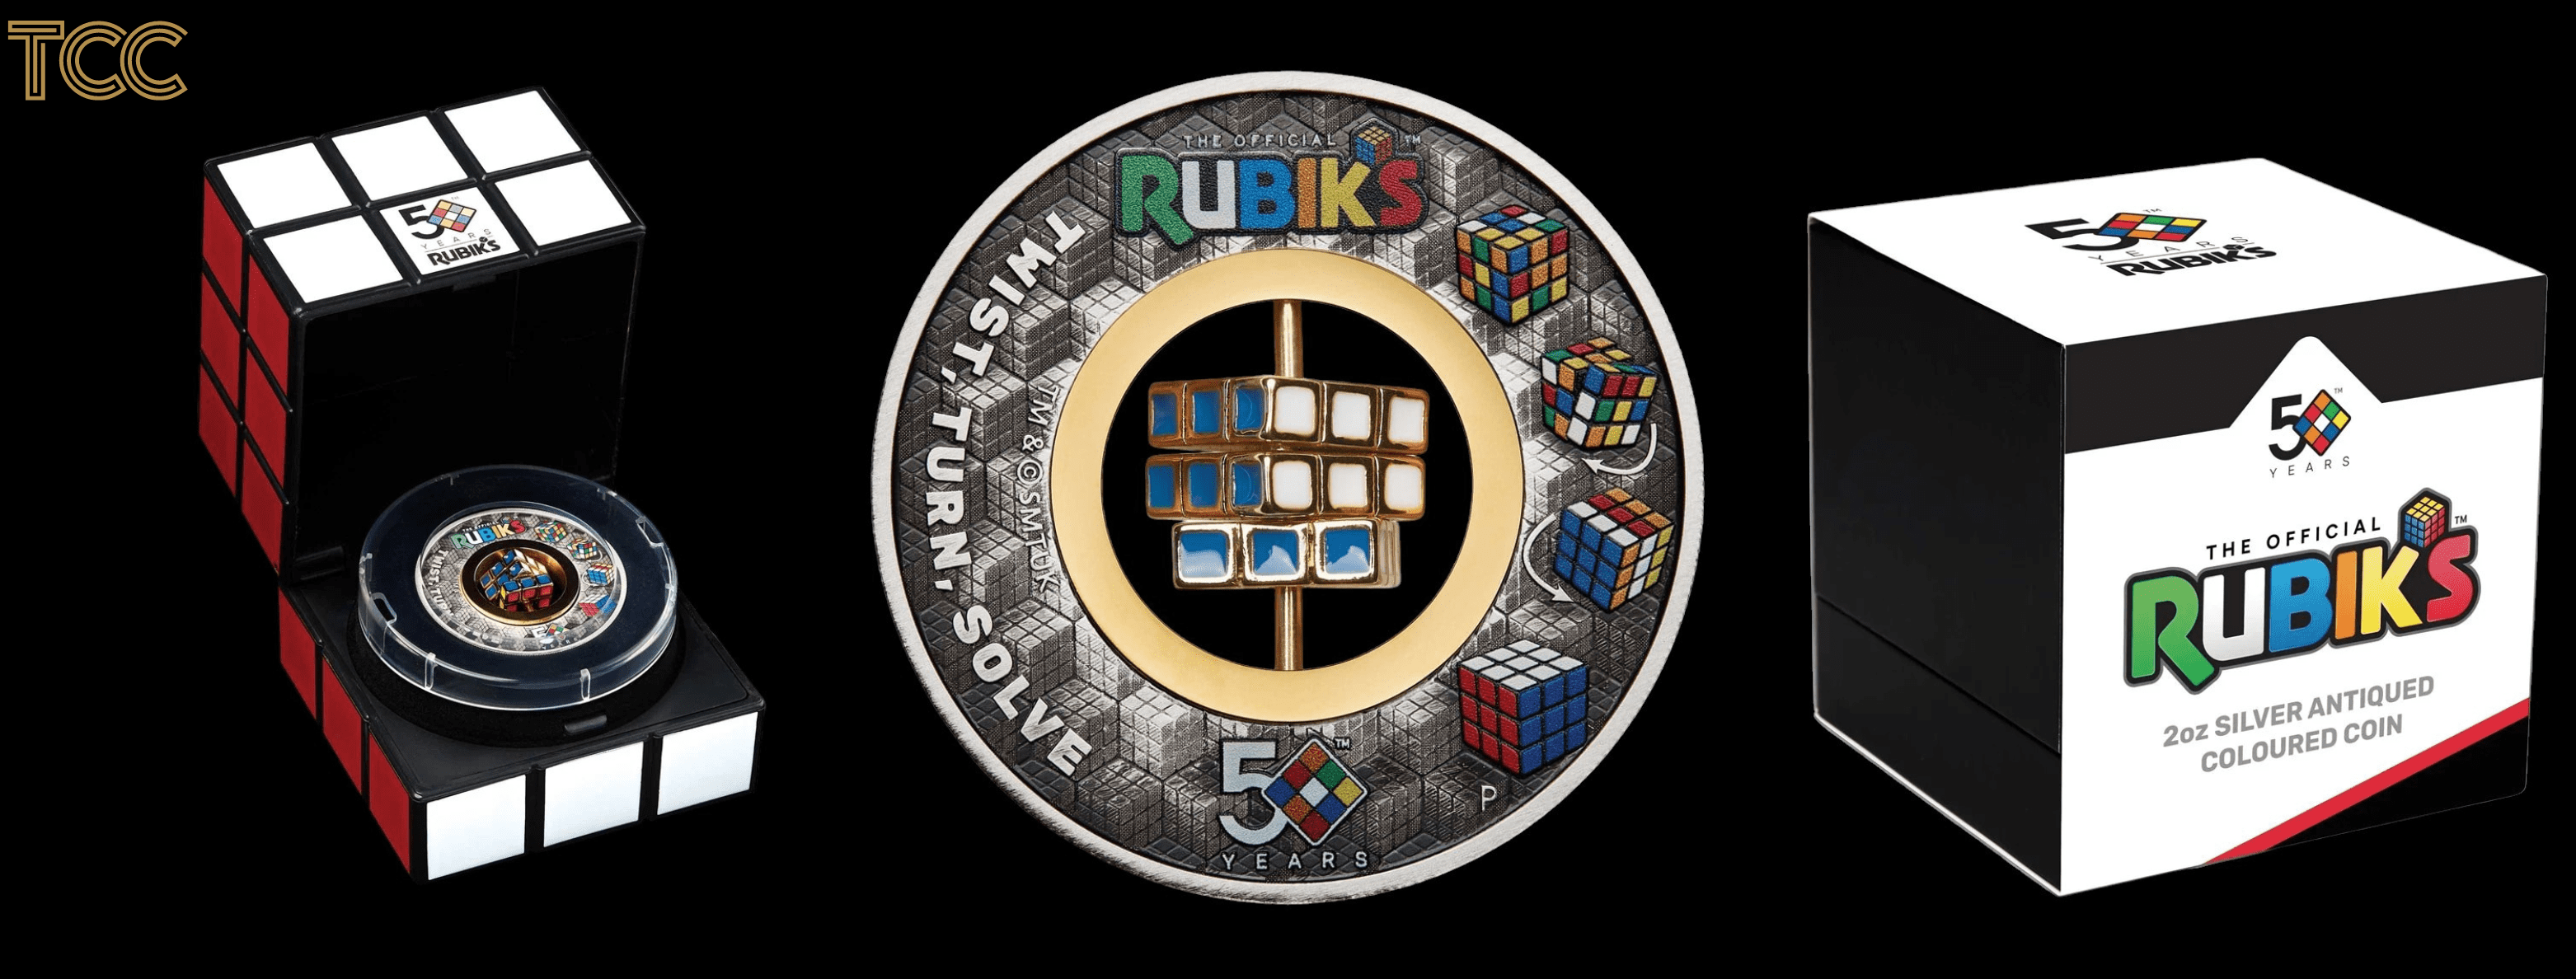 2024 $2 Rubik’s Cube 50th Anniversary 2oz Silver Antiqued Coin Slider - Slider Overview - 2